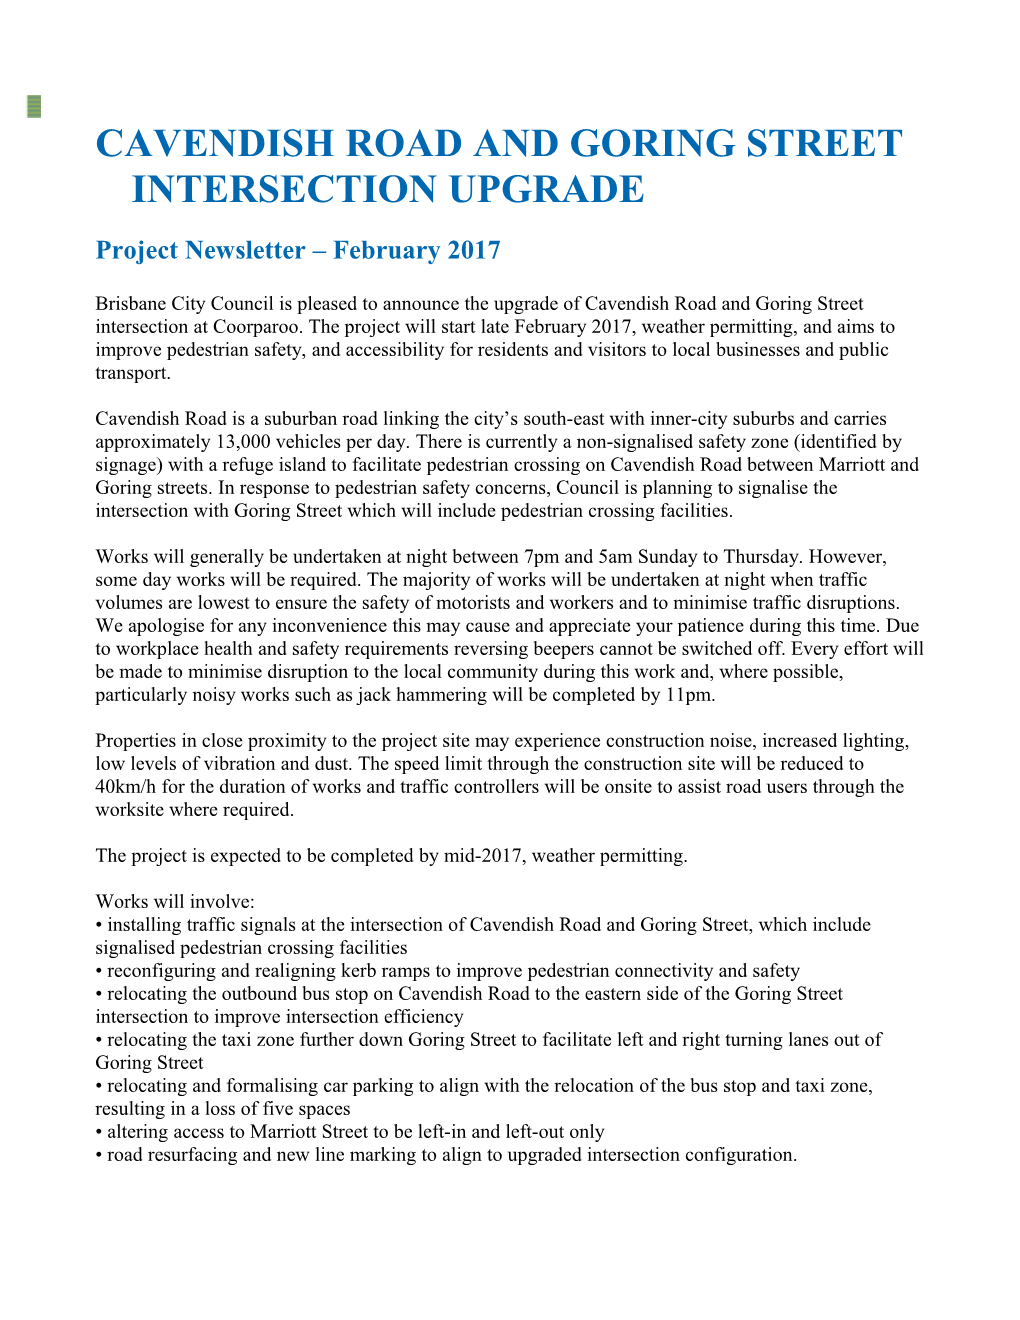 Cavendish Road and Goring Street Intersection Upgrade